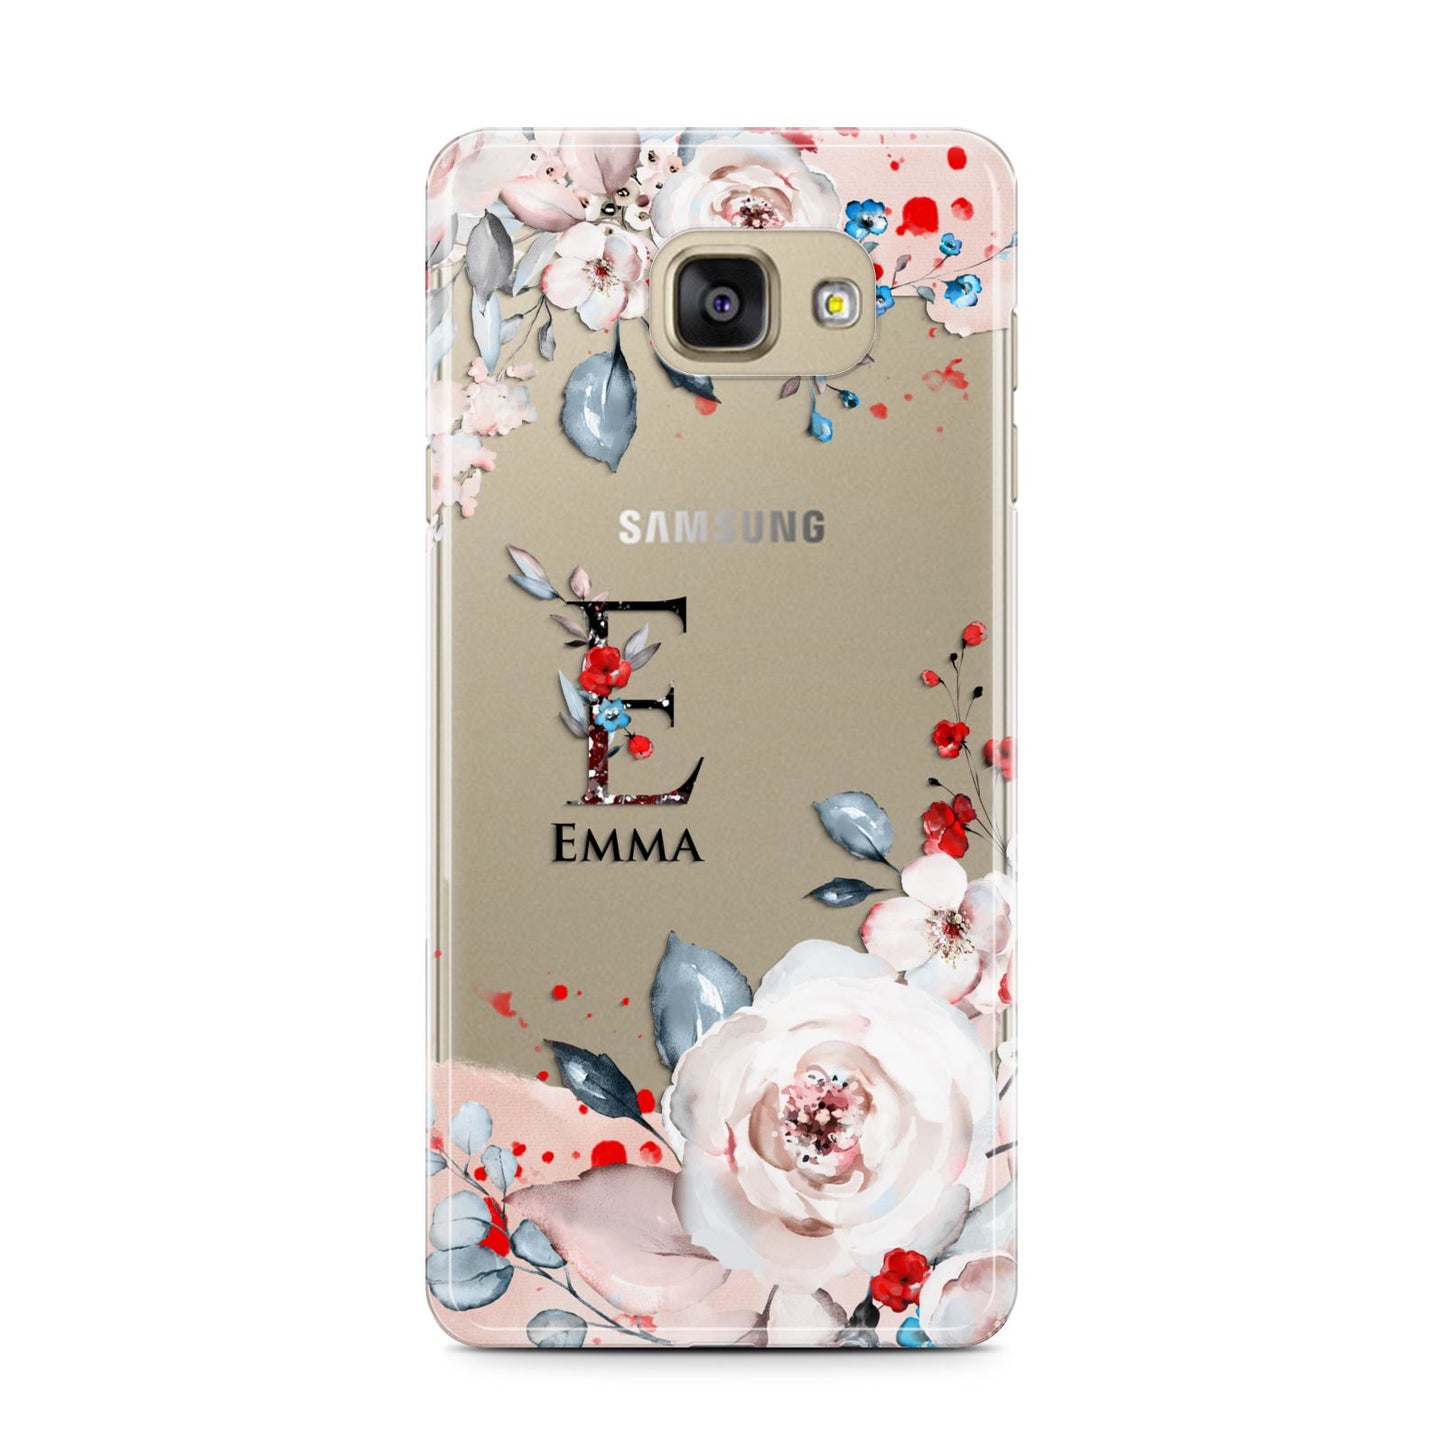 Monogrammed Roses Floral Wreath Samsung Galaxy A7 2016 Case on gold phone